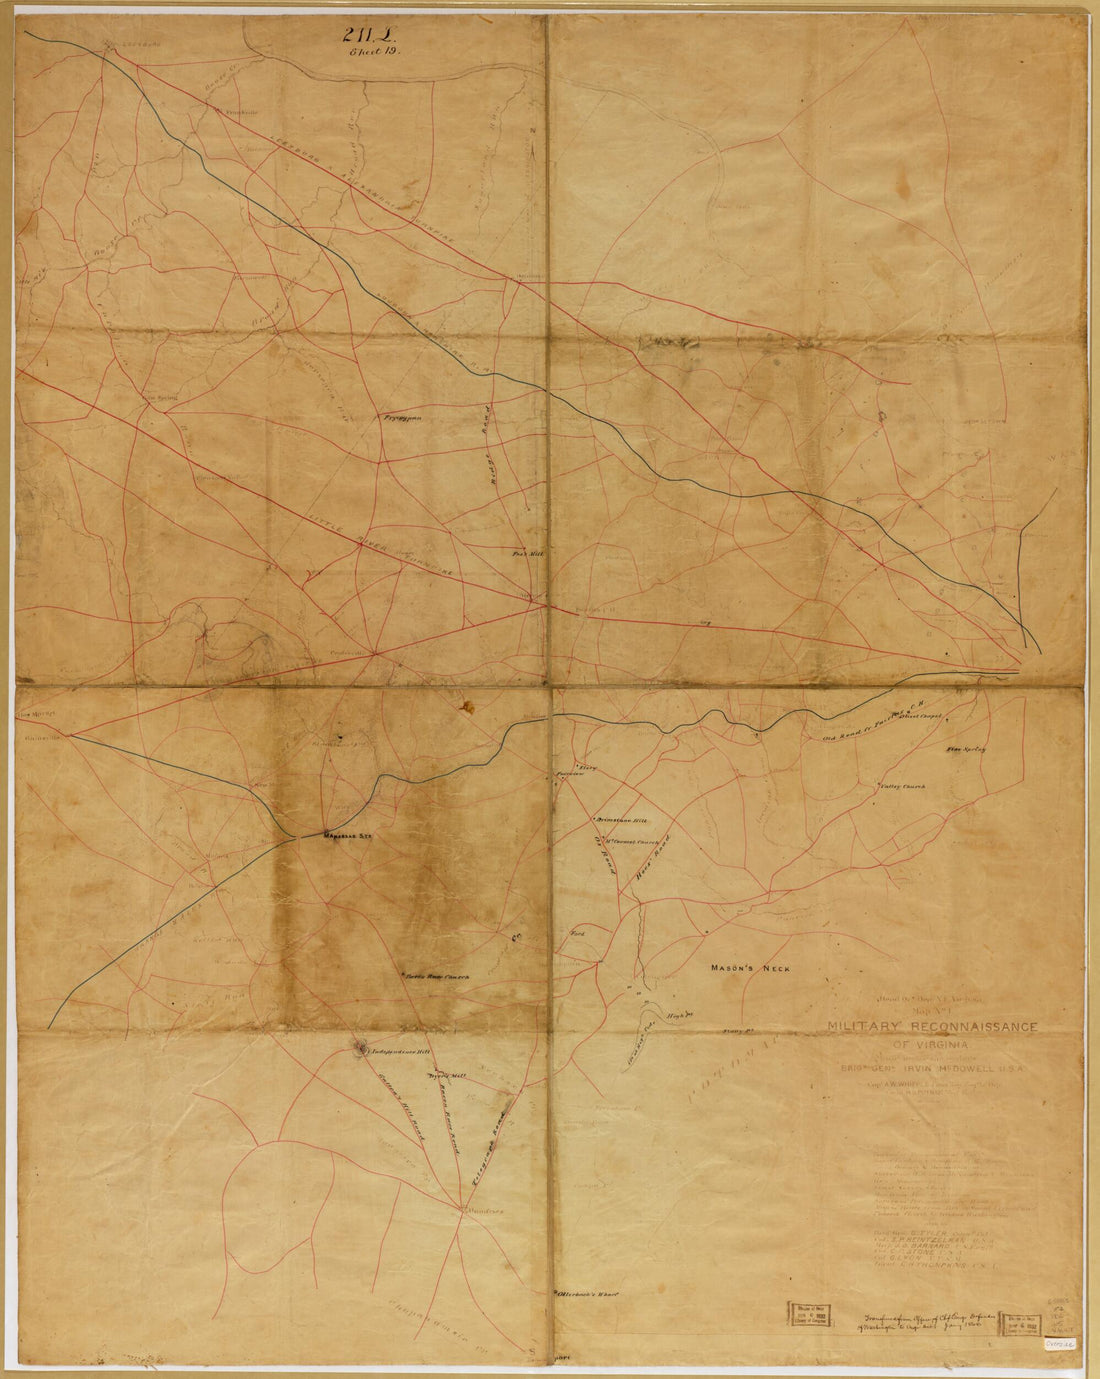 This old map of Military Reconnaissance of Virginia (Head Qrs. Dept. N. E. Virginia) from 1860 was created by Irvin McDowell, Haldimand Sumner Putnam,  United States. Army. Corps of Engineers, Amiel Weeks Whipple, J. J. Young in 1860